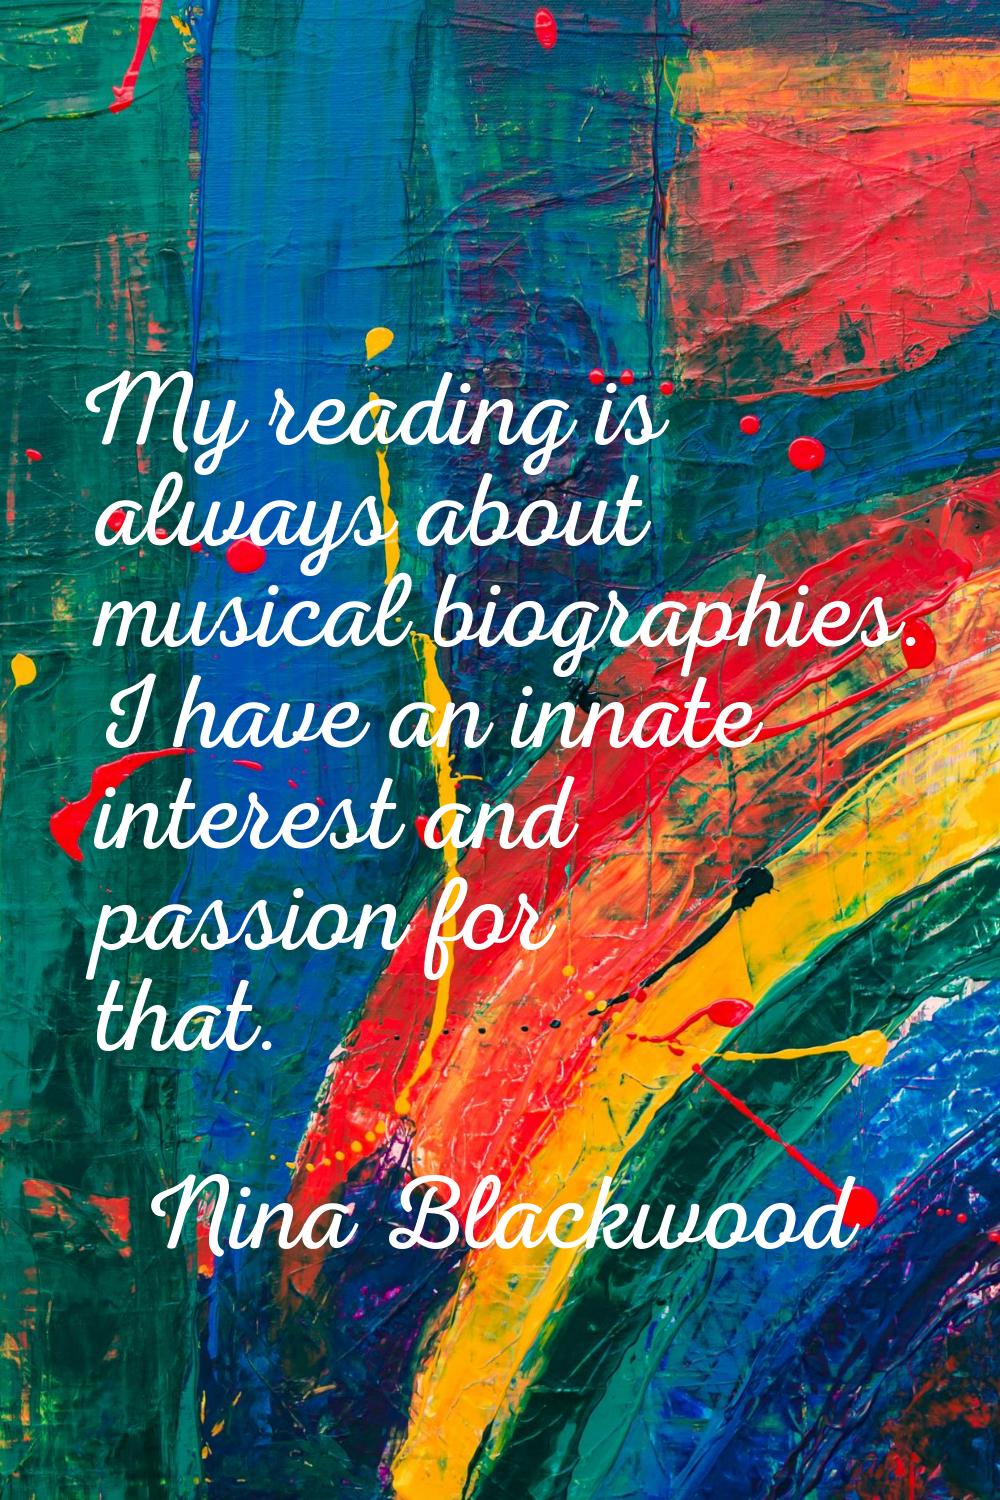 My reading is always about musical biographies. I have an innate interest and passion for that.